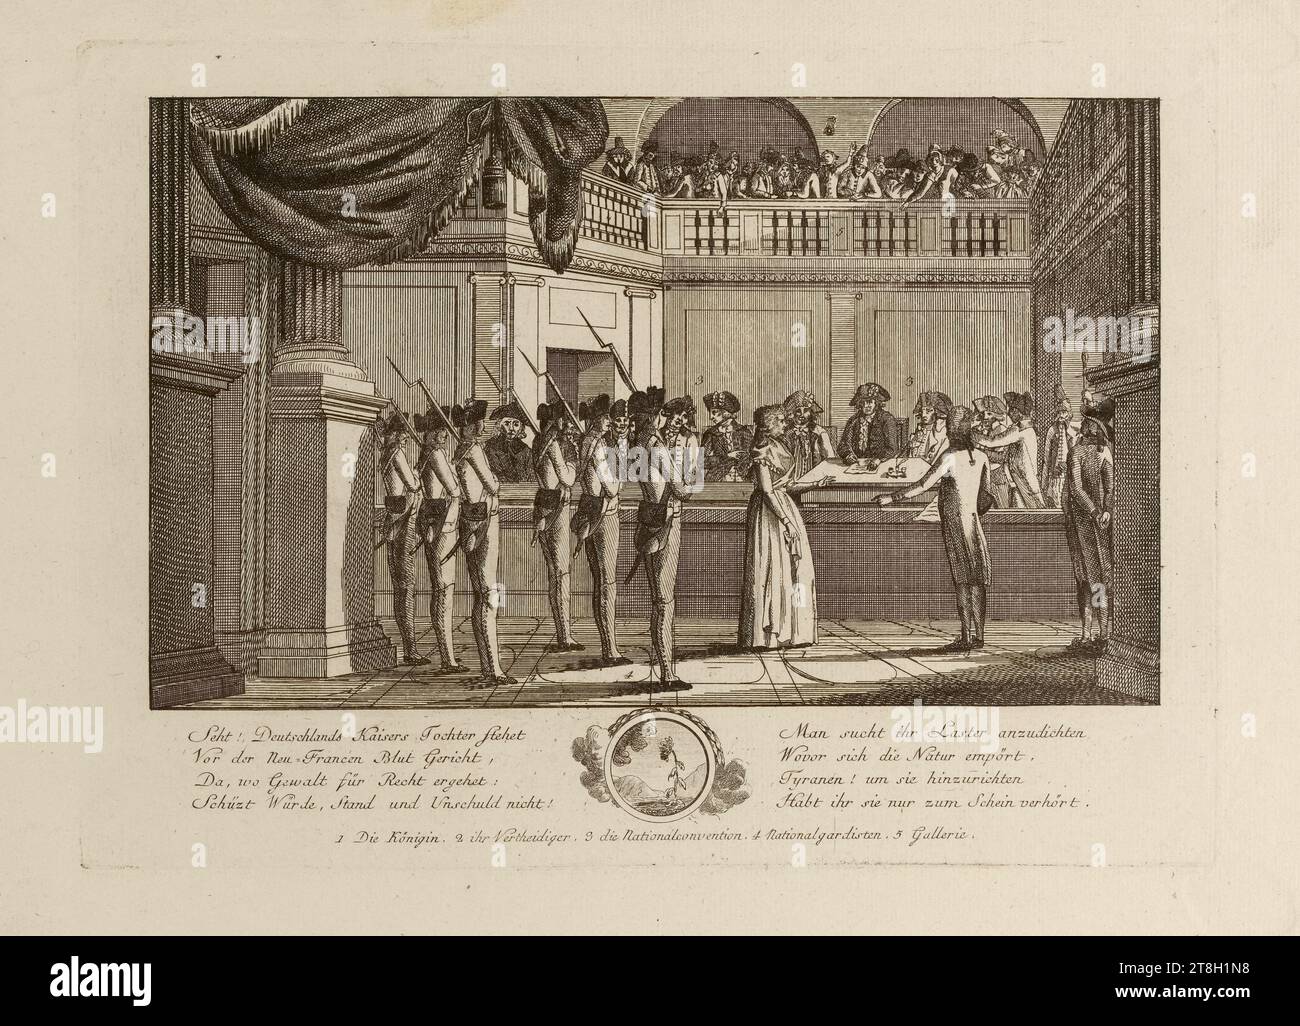 German version of Marie-Antoinette's trial before the Revolutionary Court on October 14, 1793. French Revolution, Engraver, Between 1776 and 1800, 18th century, Print, Graphic arts, French Revolution, Print, Etching, Germany, Dimensions - Work: Height: 21.8 cm, Width: 30.2 cm, Dimensions - Antique mount:, Height: 32.5 cm, Width: 50 cm Stock Photo